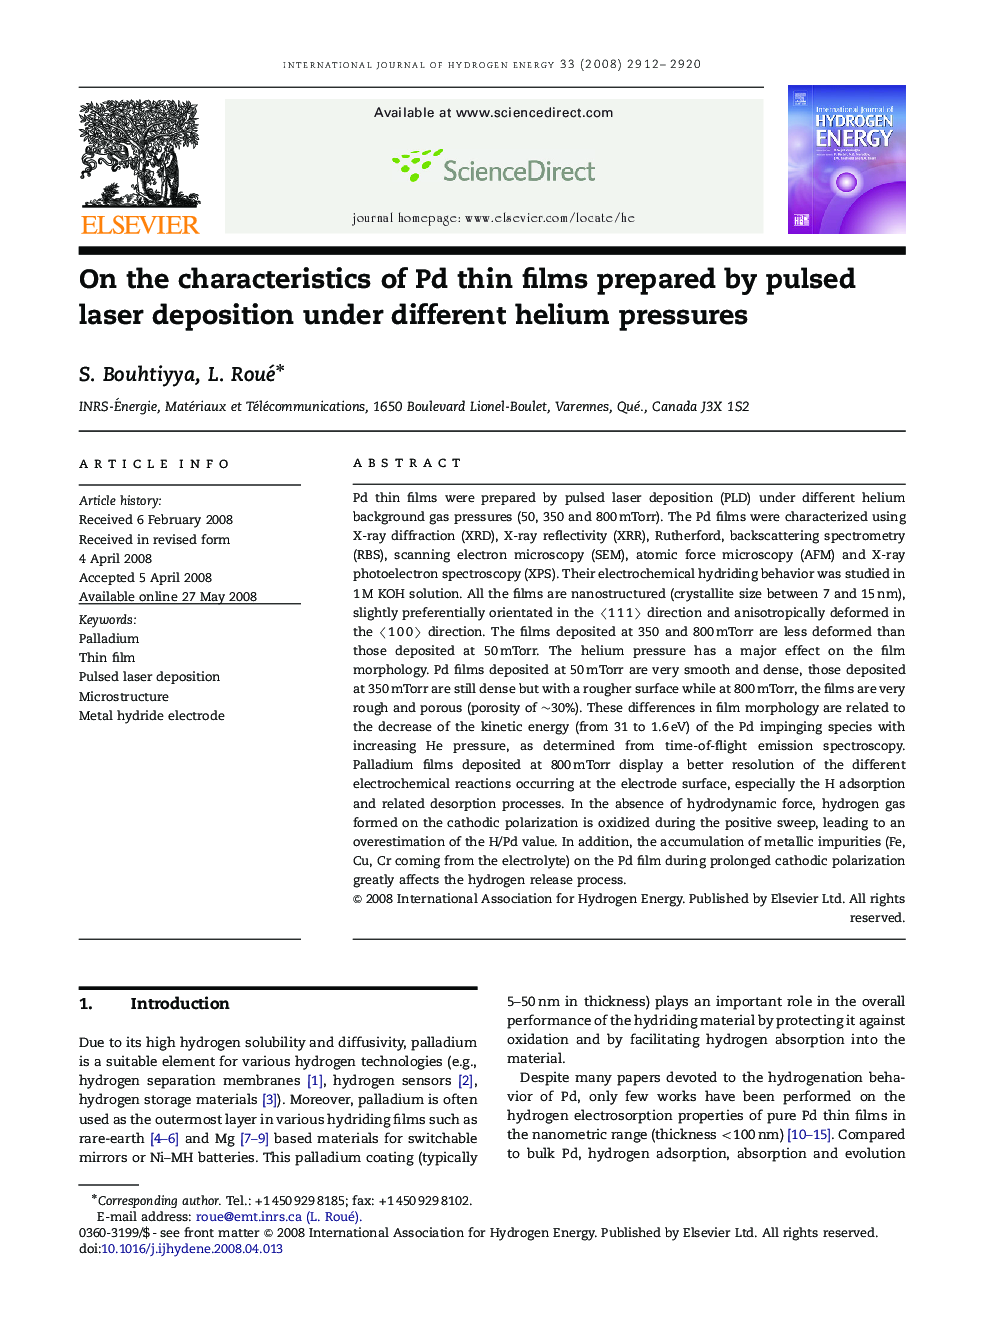 On the characteristics of Pd thin films prepared by pulsed laser deposition under different helium pressures